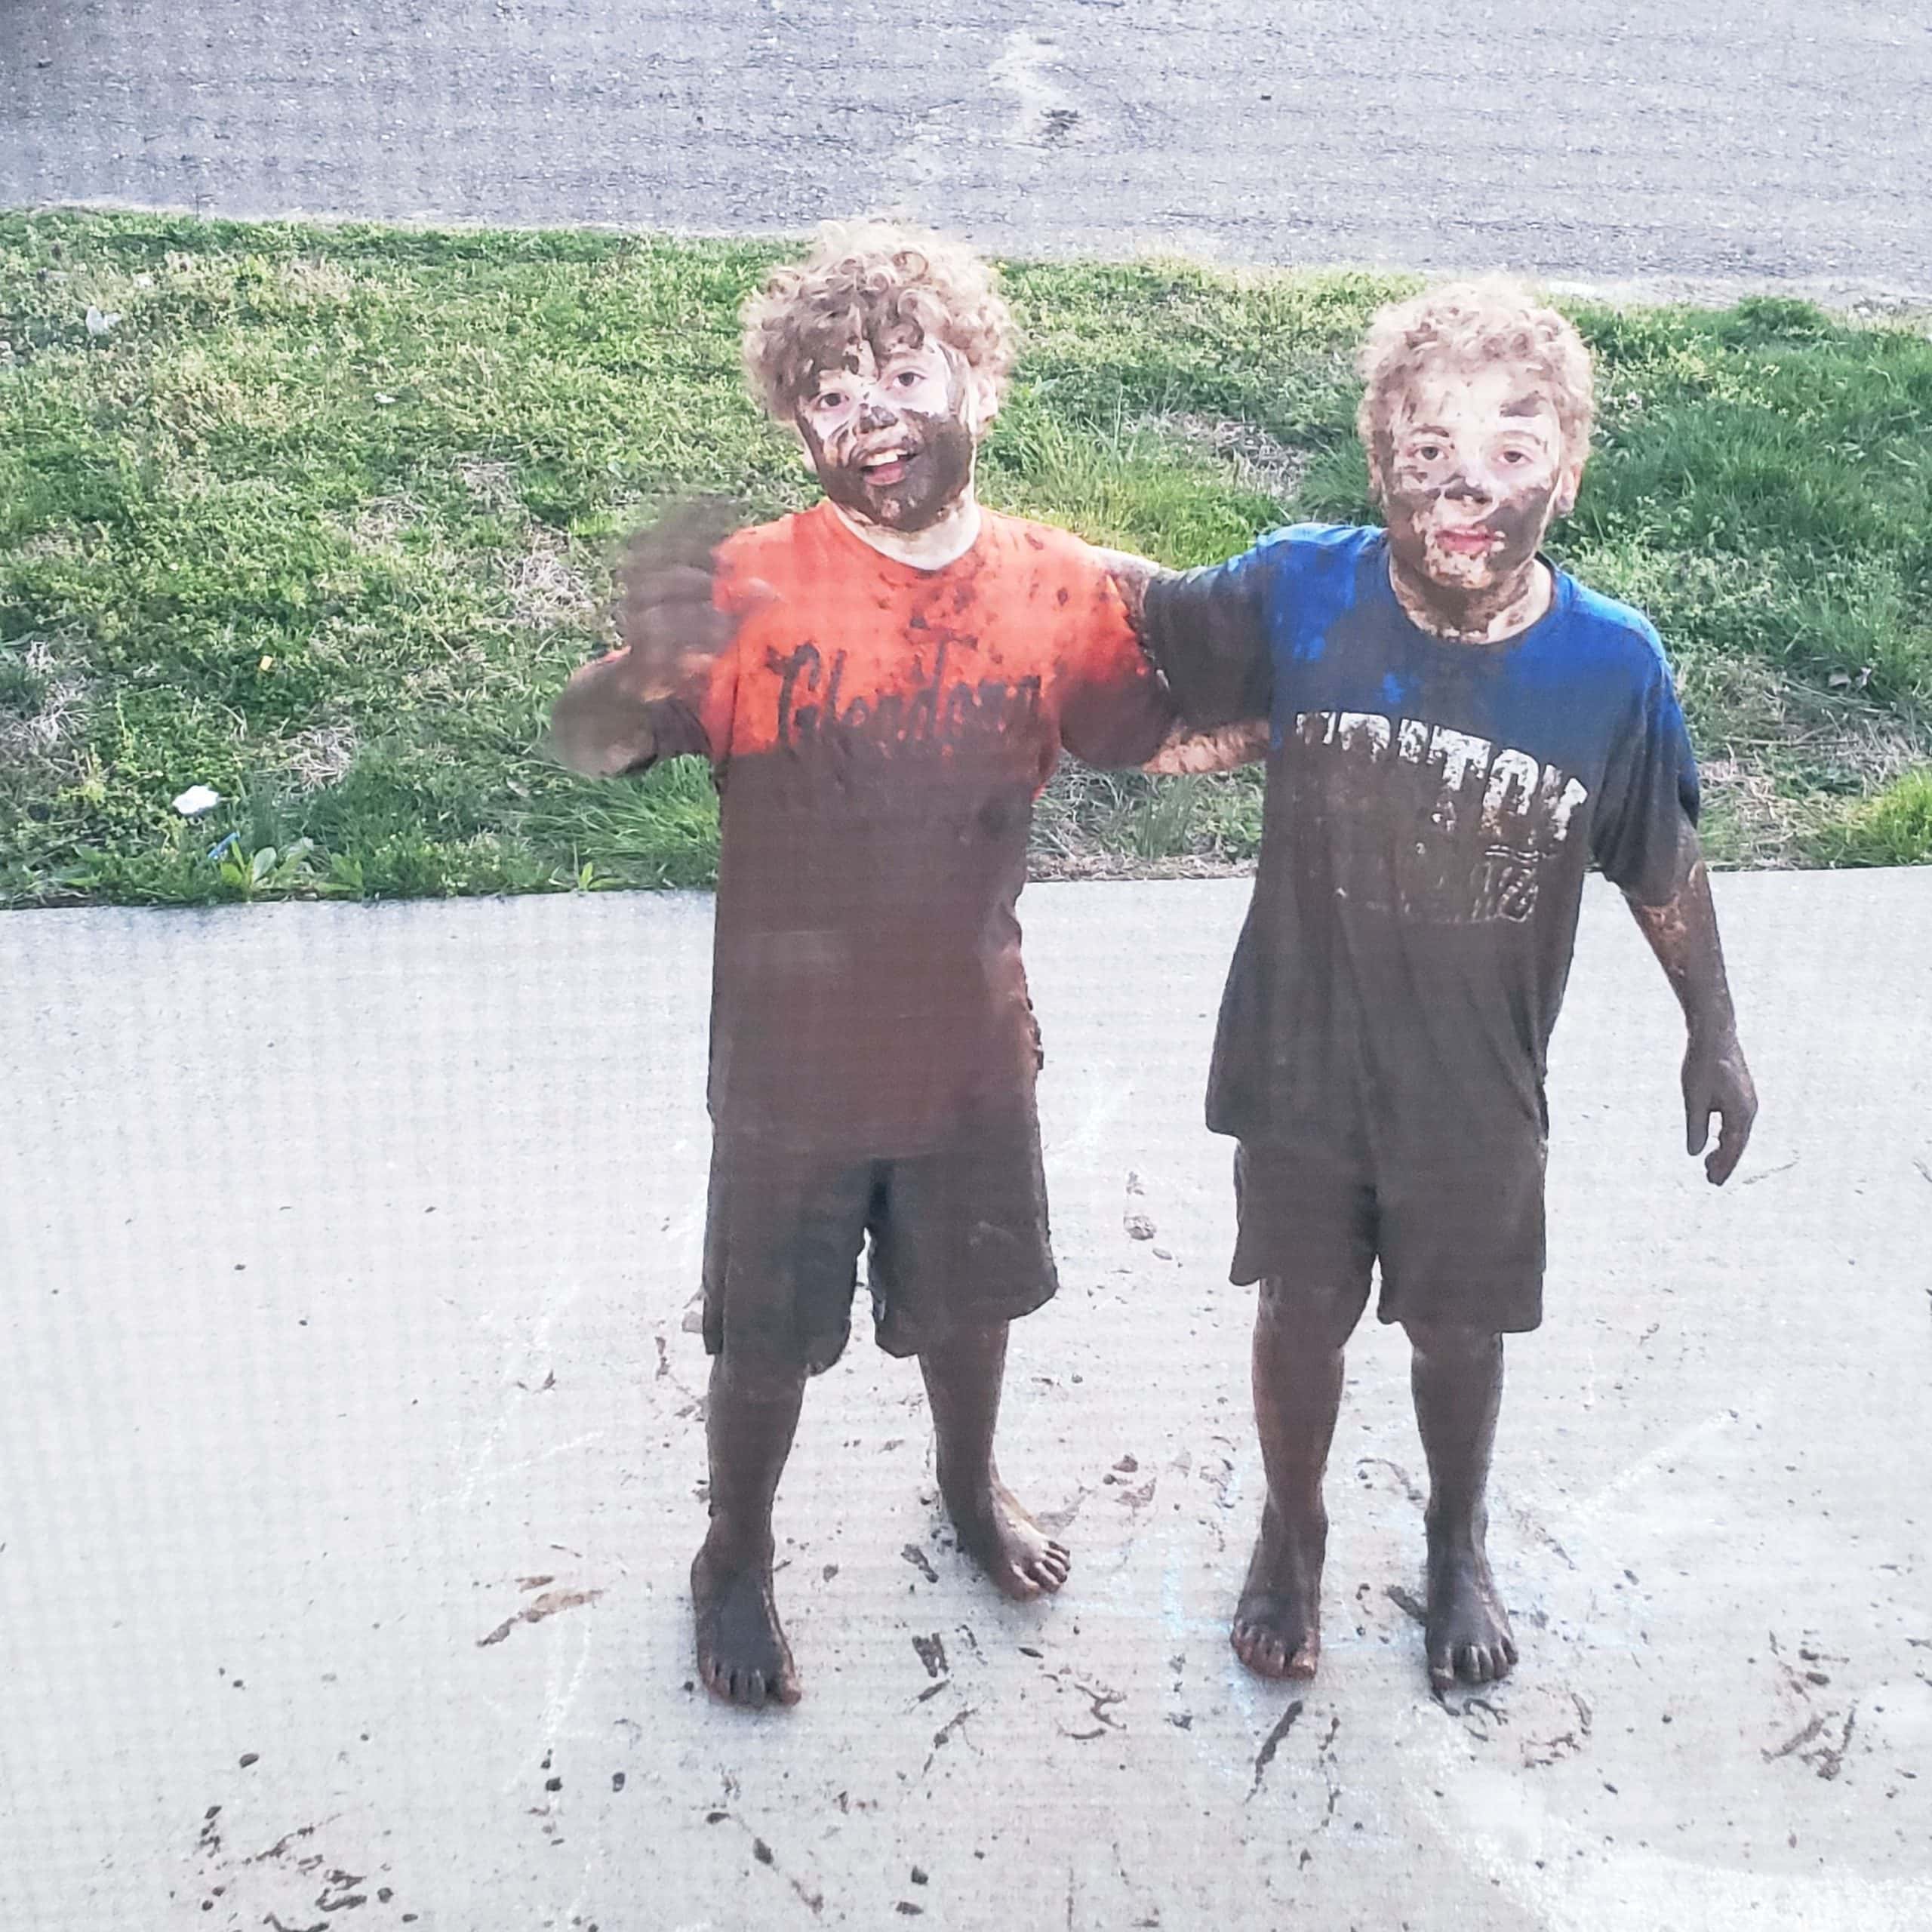 twin boys happily covered in mud.